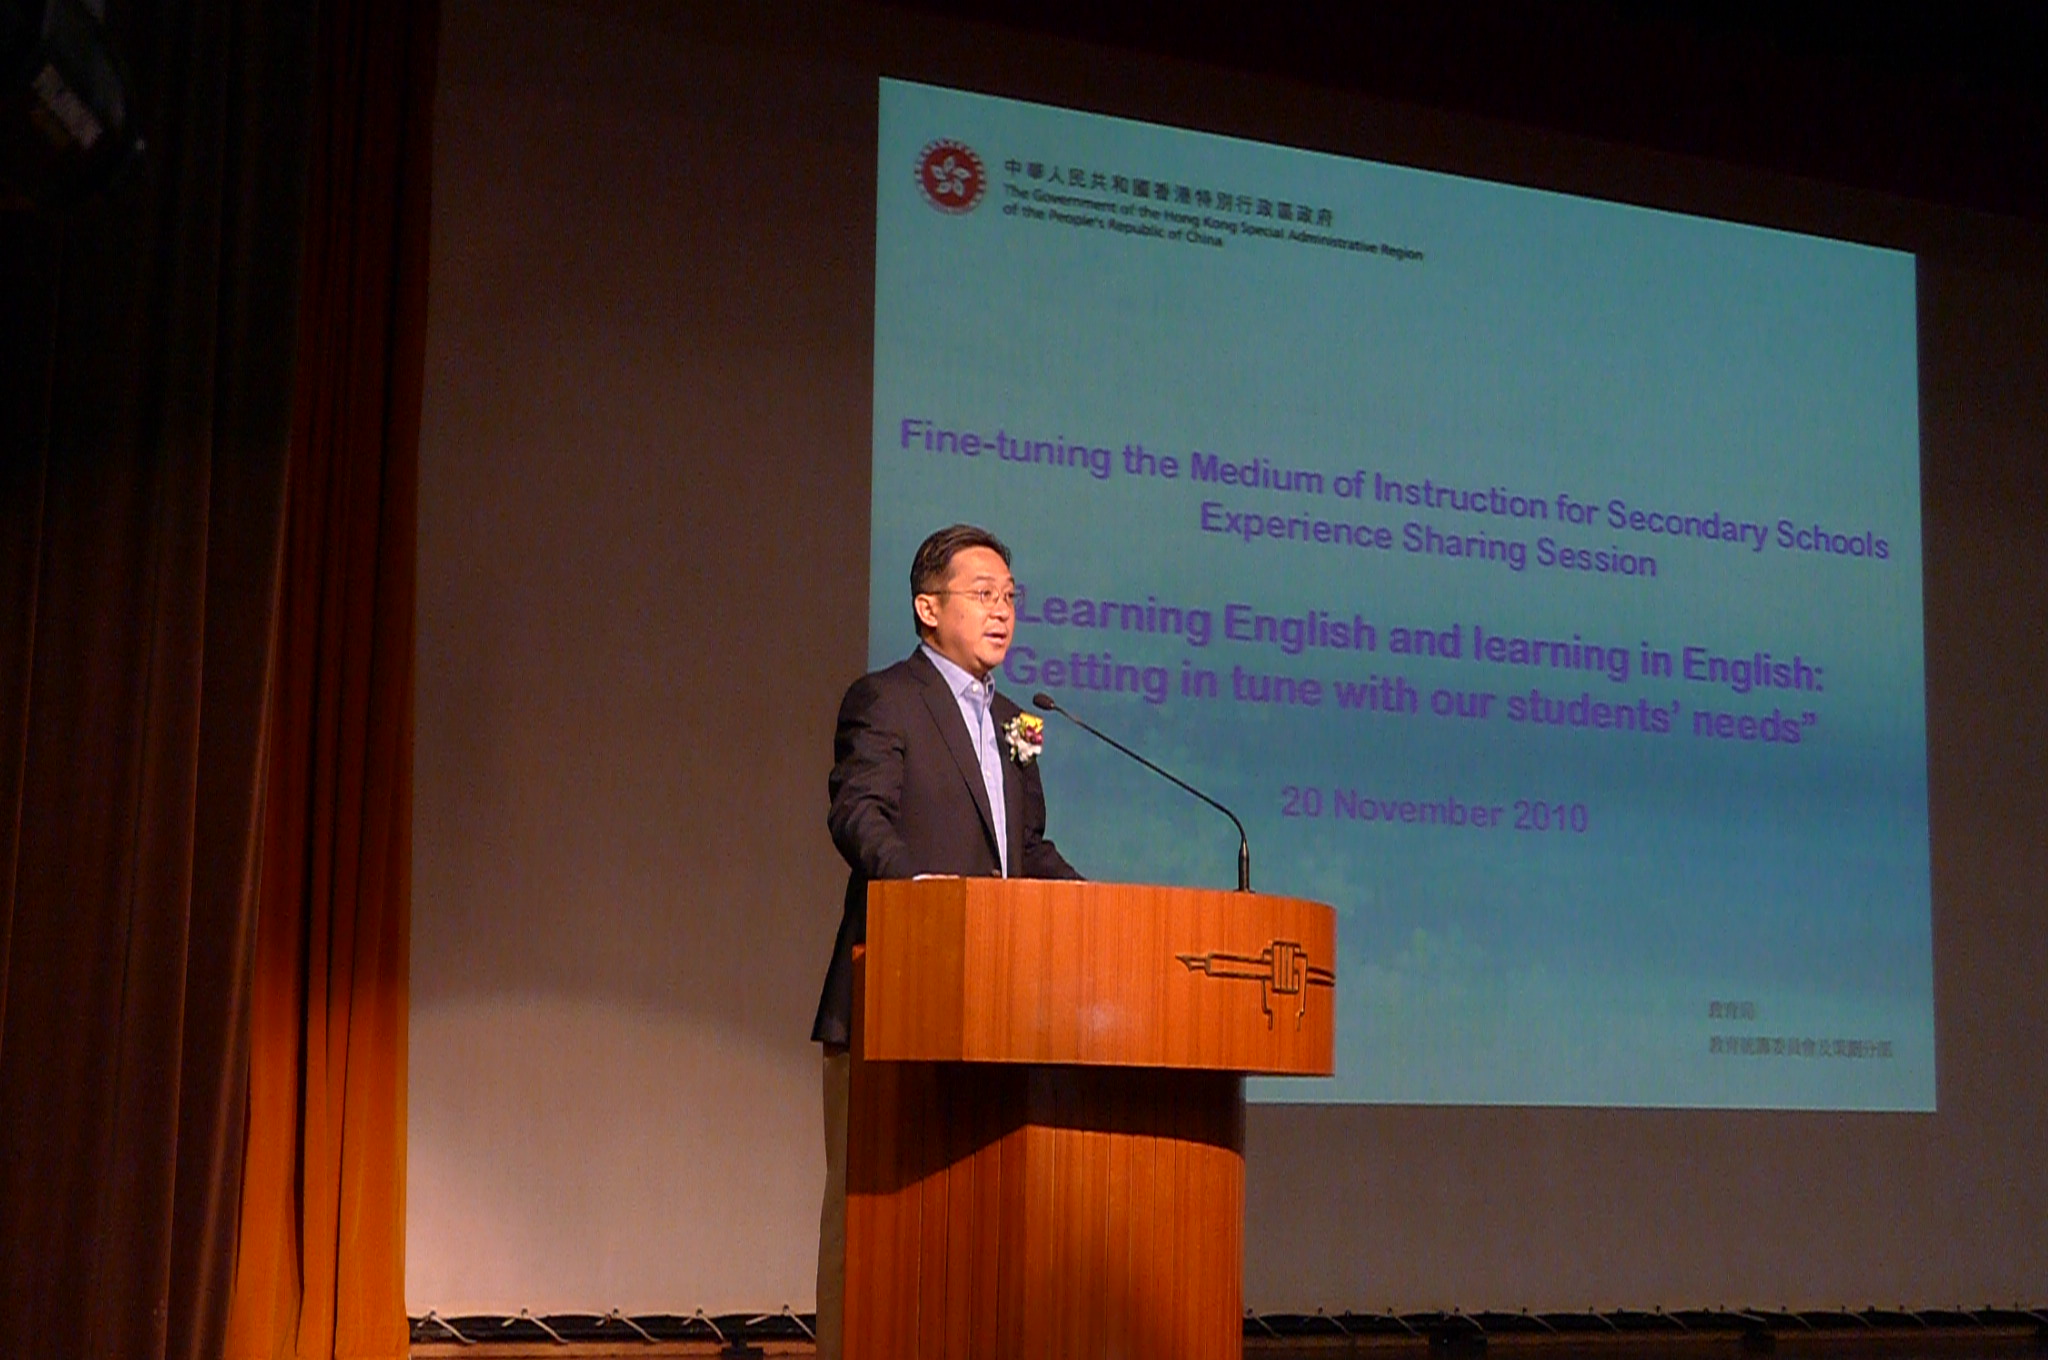 Mr Kenneth Chen, JP, Under Secretary of Education, gives Opening Remarks in the Experience Sharing Session on Fine-tuning the Medium of Instruction for Secondary Schools - Learning English and learning in English - Getting in tune with our students' needs